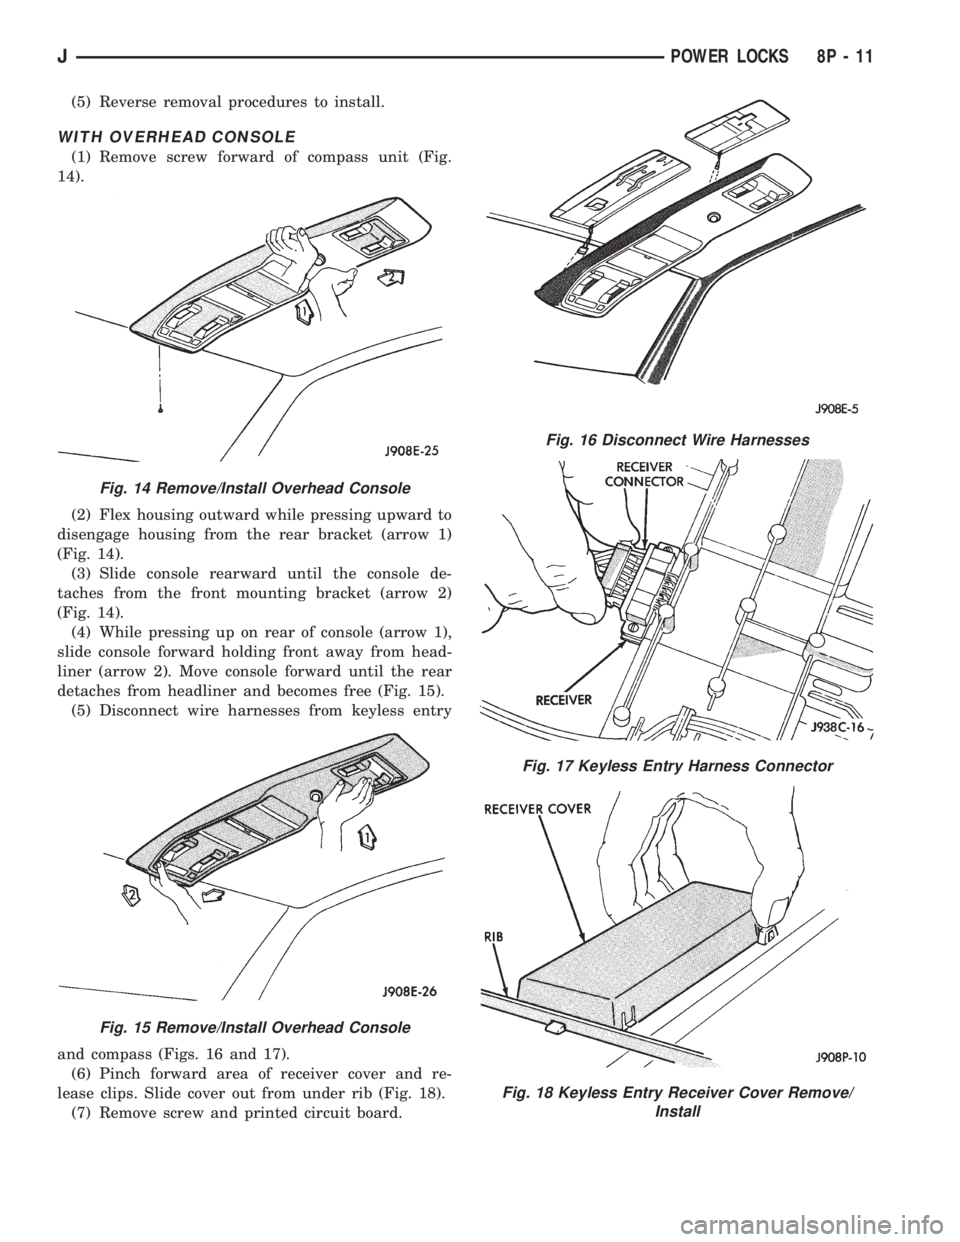 JEEP XJ 1995  Service And Repair Manual (5) Reverse removal procedures to install.
WITH OVERHEAD CONSOLE
(1) Remove screw forward of compass unit (Fig.
14).
(2) Flex housing outward while pressing upward to
disengage housing from the rear b